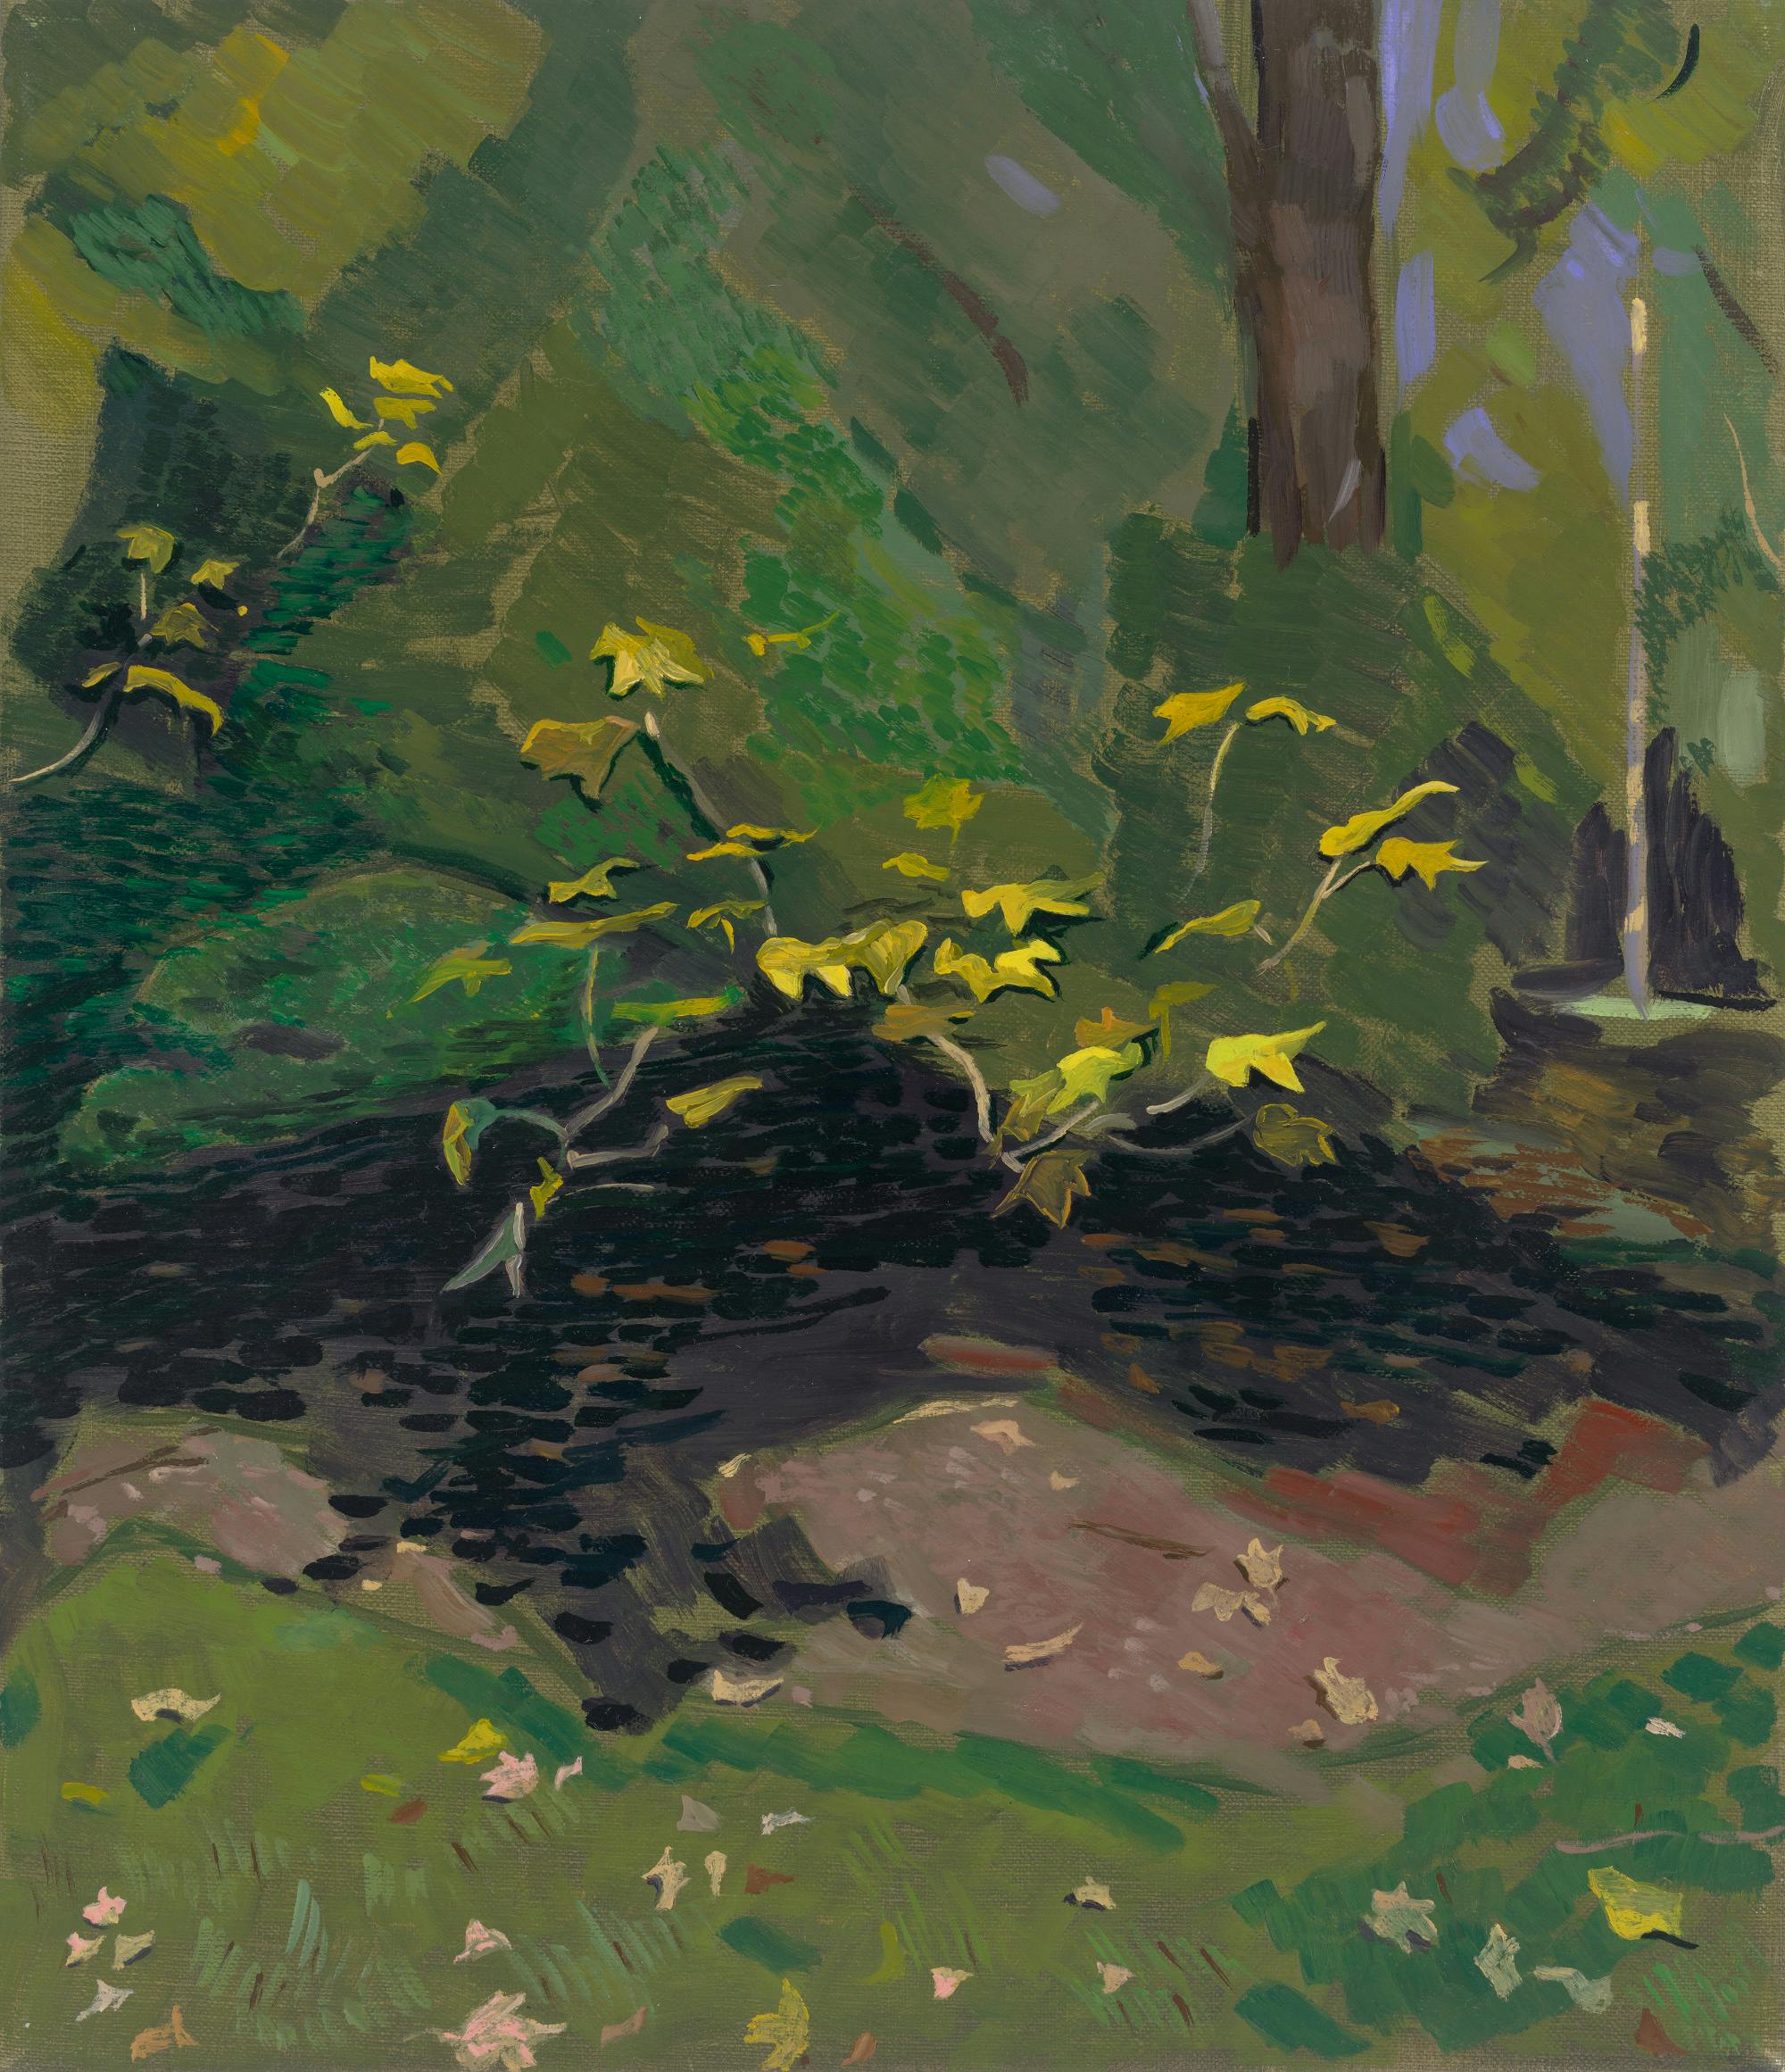 Dayan J, Leaves and Shadows, Oil on Linen, 35x30cm